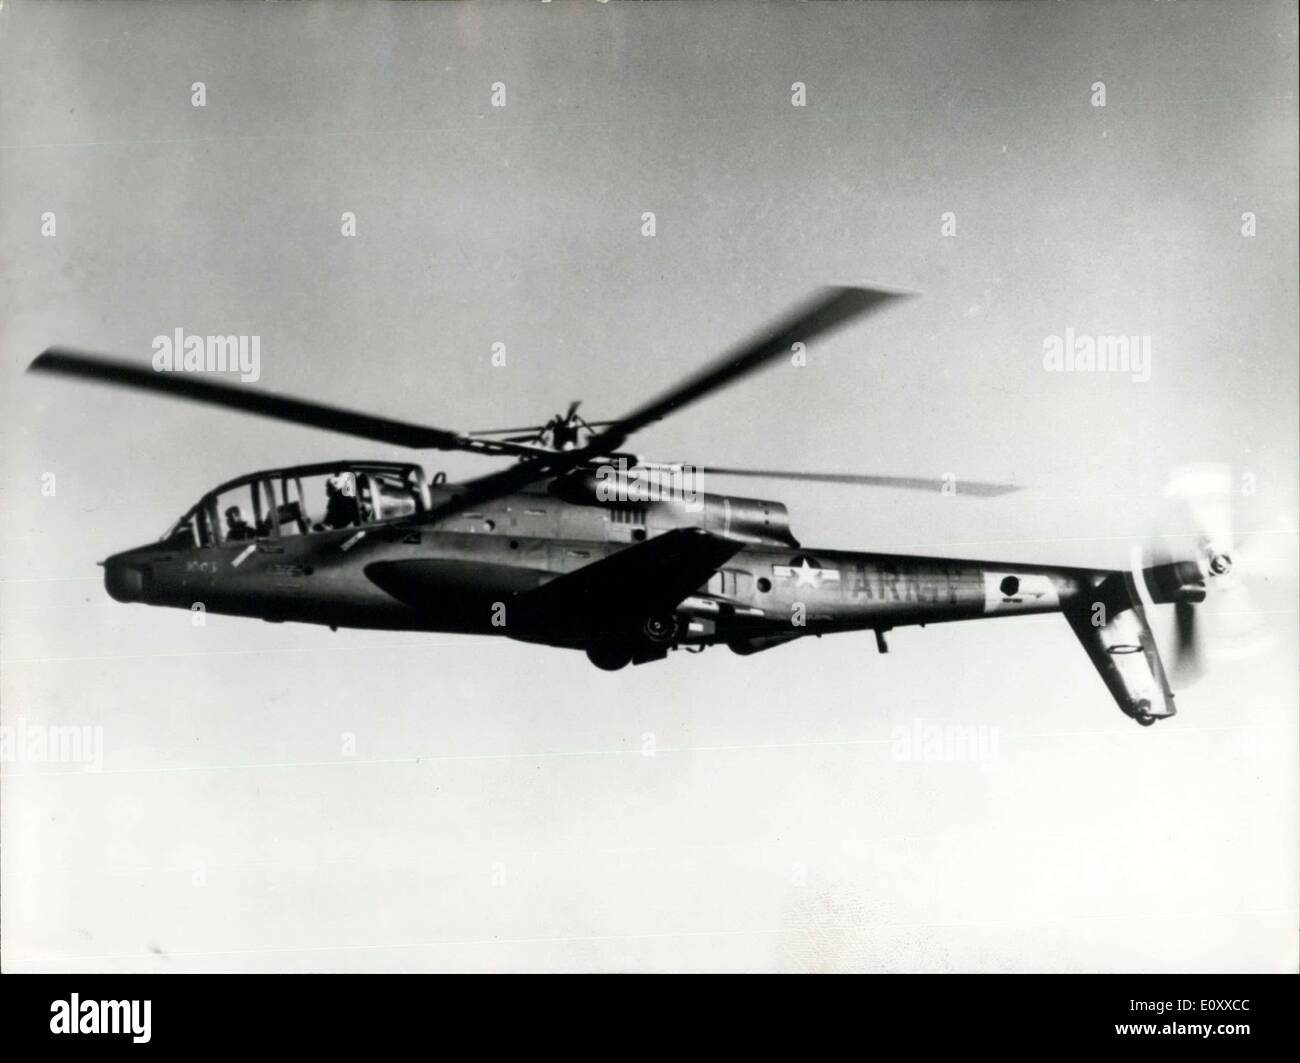 Dec. 13, 1967 - Cheyenne uprising: US Army AH-56 a Cheyenne named after the Indian Warriors of the Western Plains makes a helicopter vertical takeoff. The Winged and Rotor-bladed compound helicopter made its first public flight demonstration at Van Nuys airport recently. Stock Photo